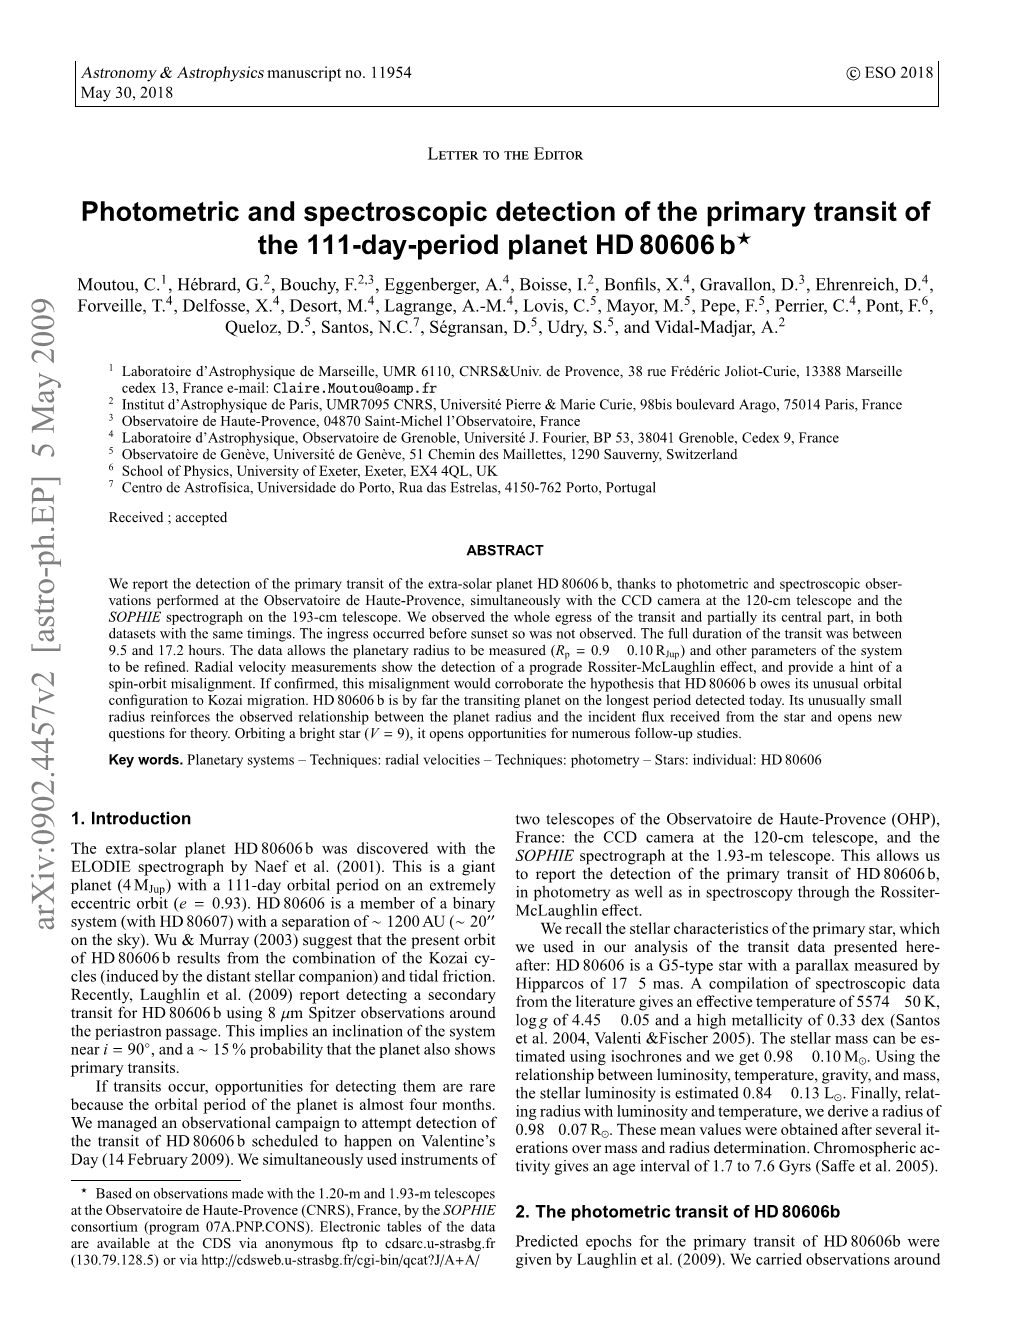 Photometric and Spectroscopic Detection of the Primary Transit of the 111-Day-Period Planet HD 80606 B